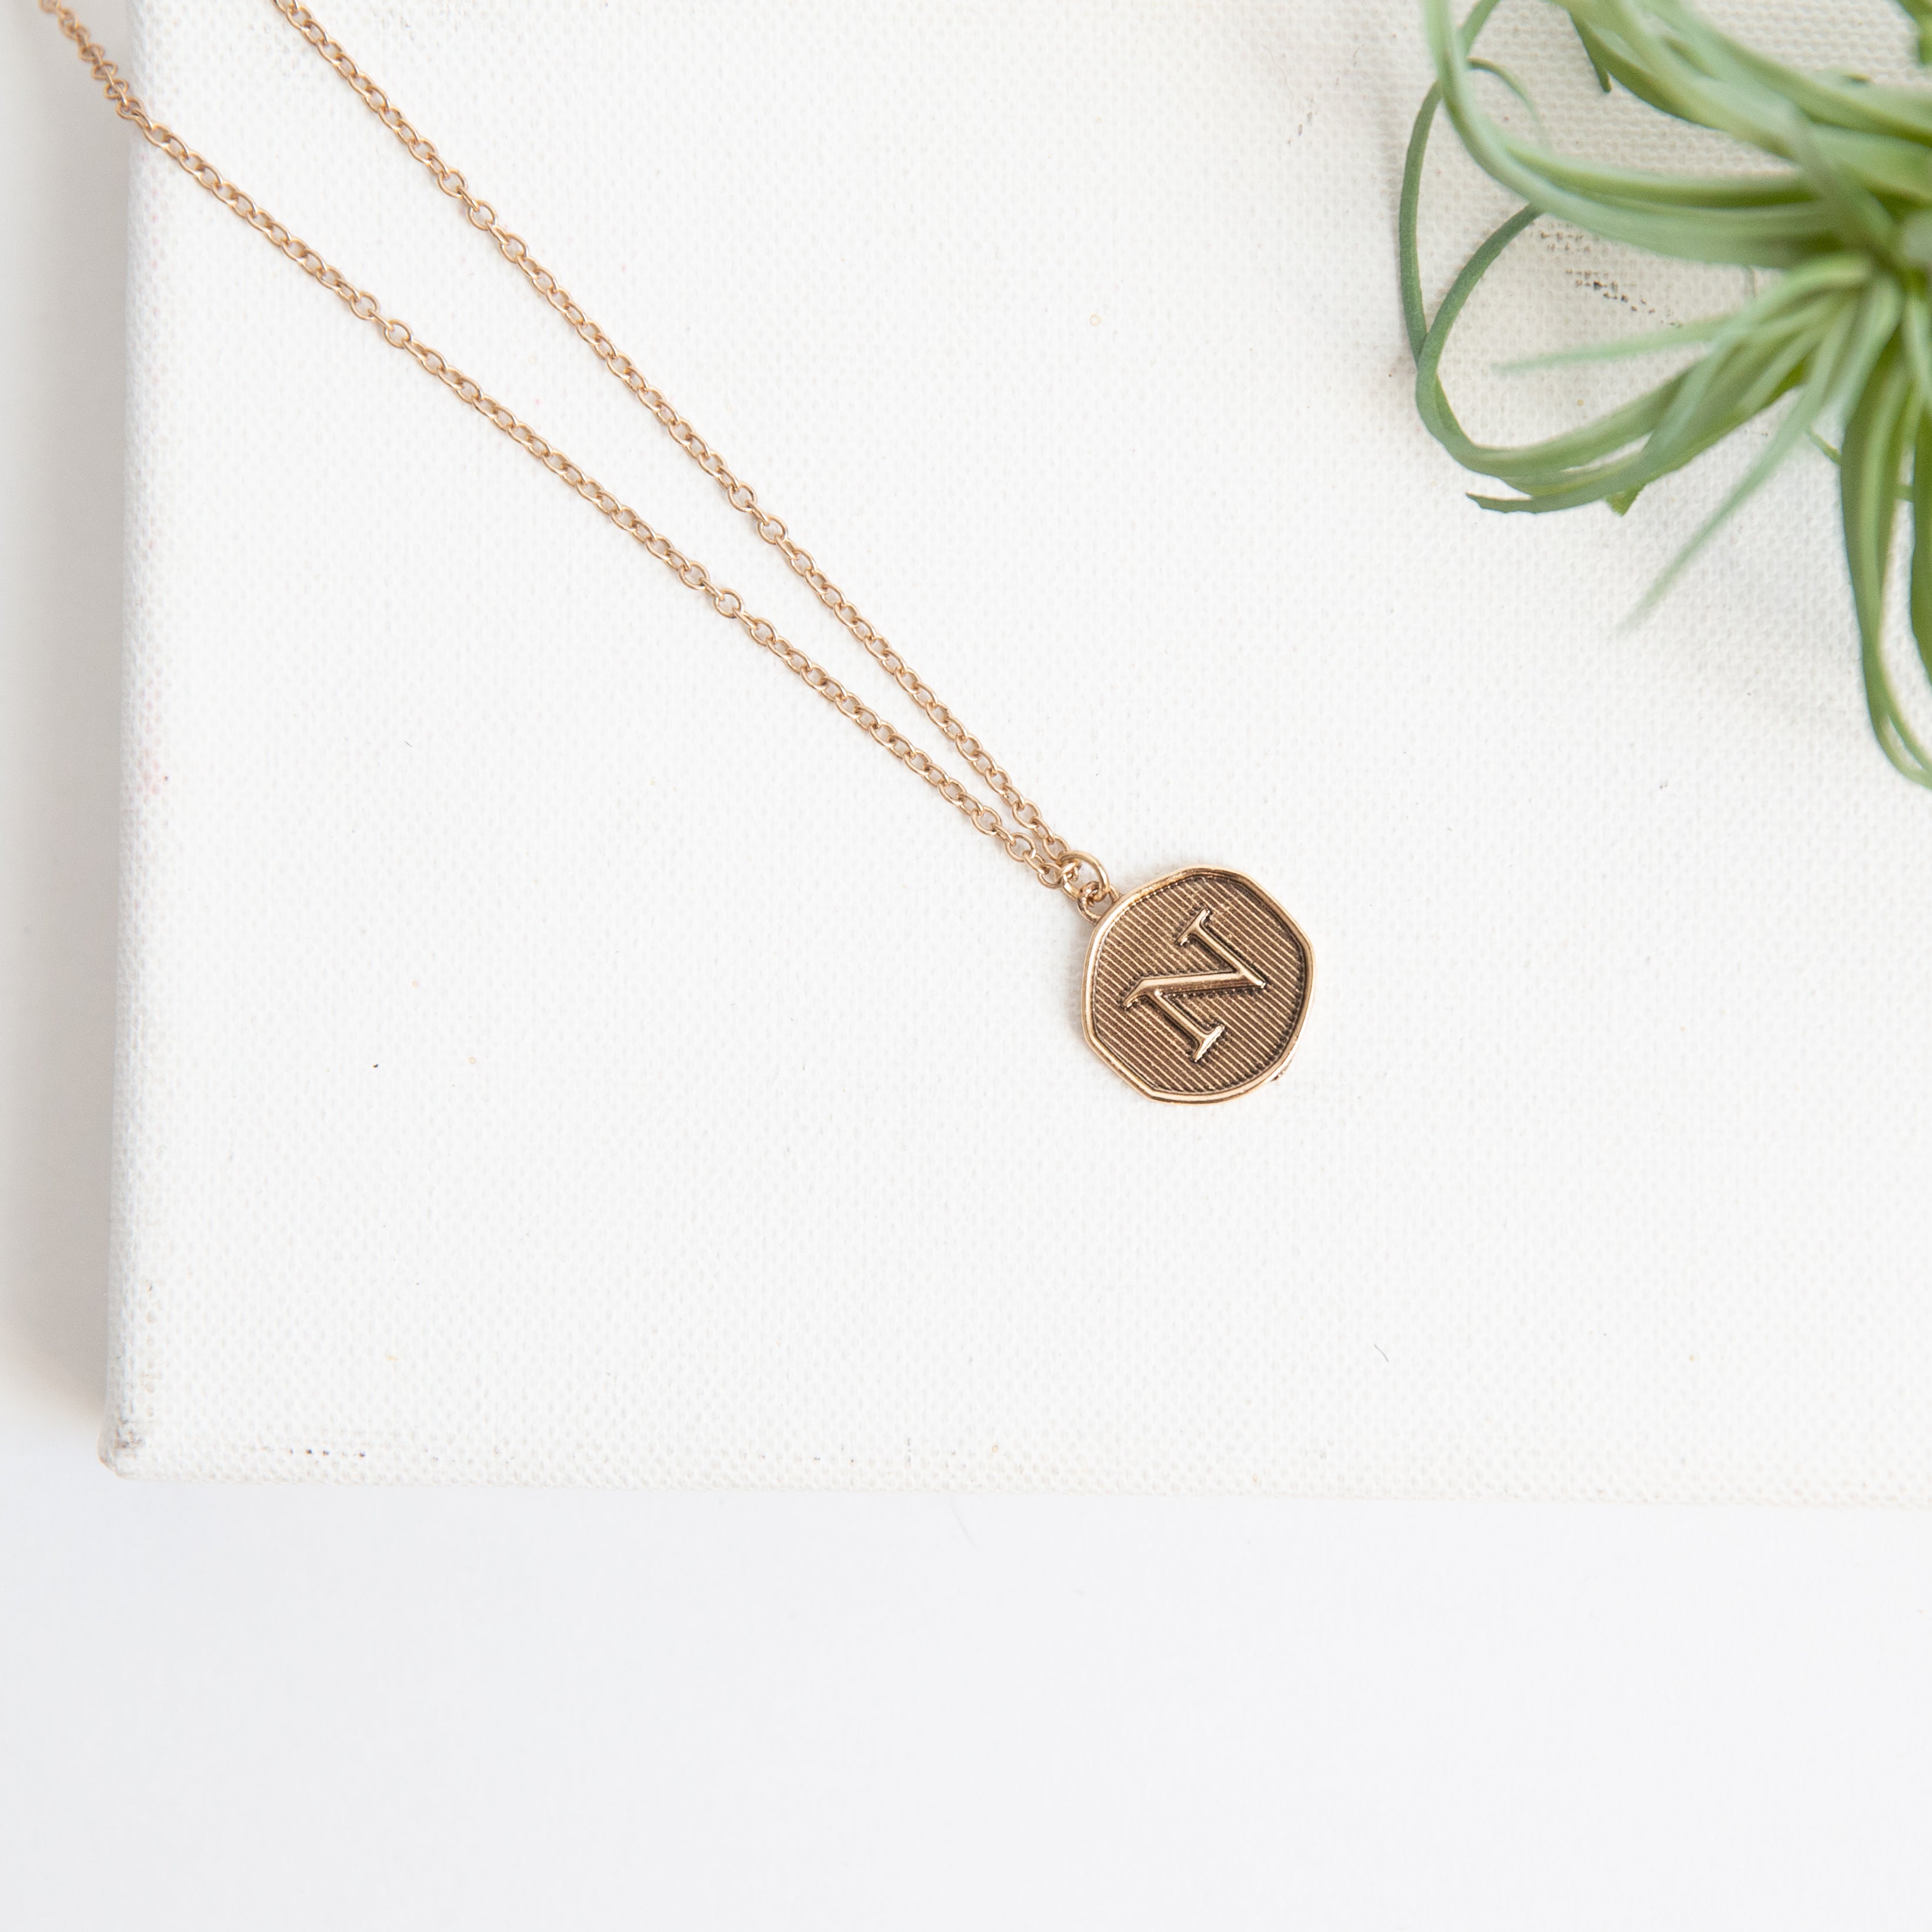 Initial Collection Necklace - Letter V - Funky Monkey Fashion Accessories